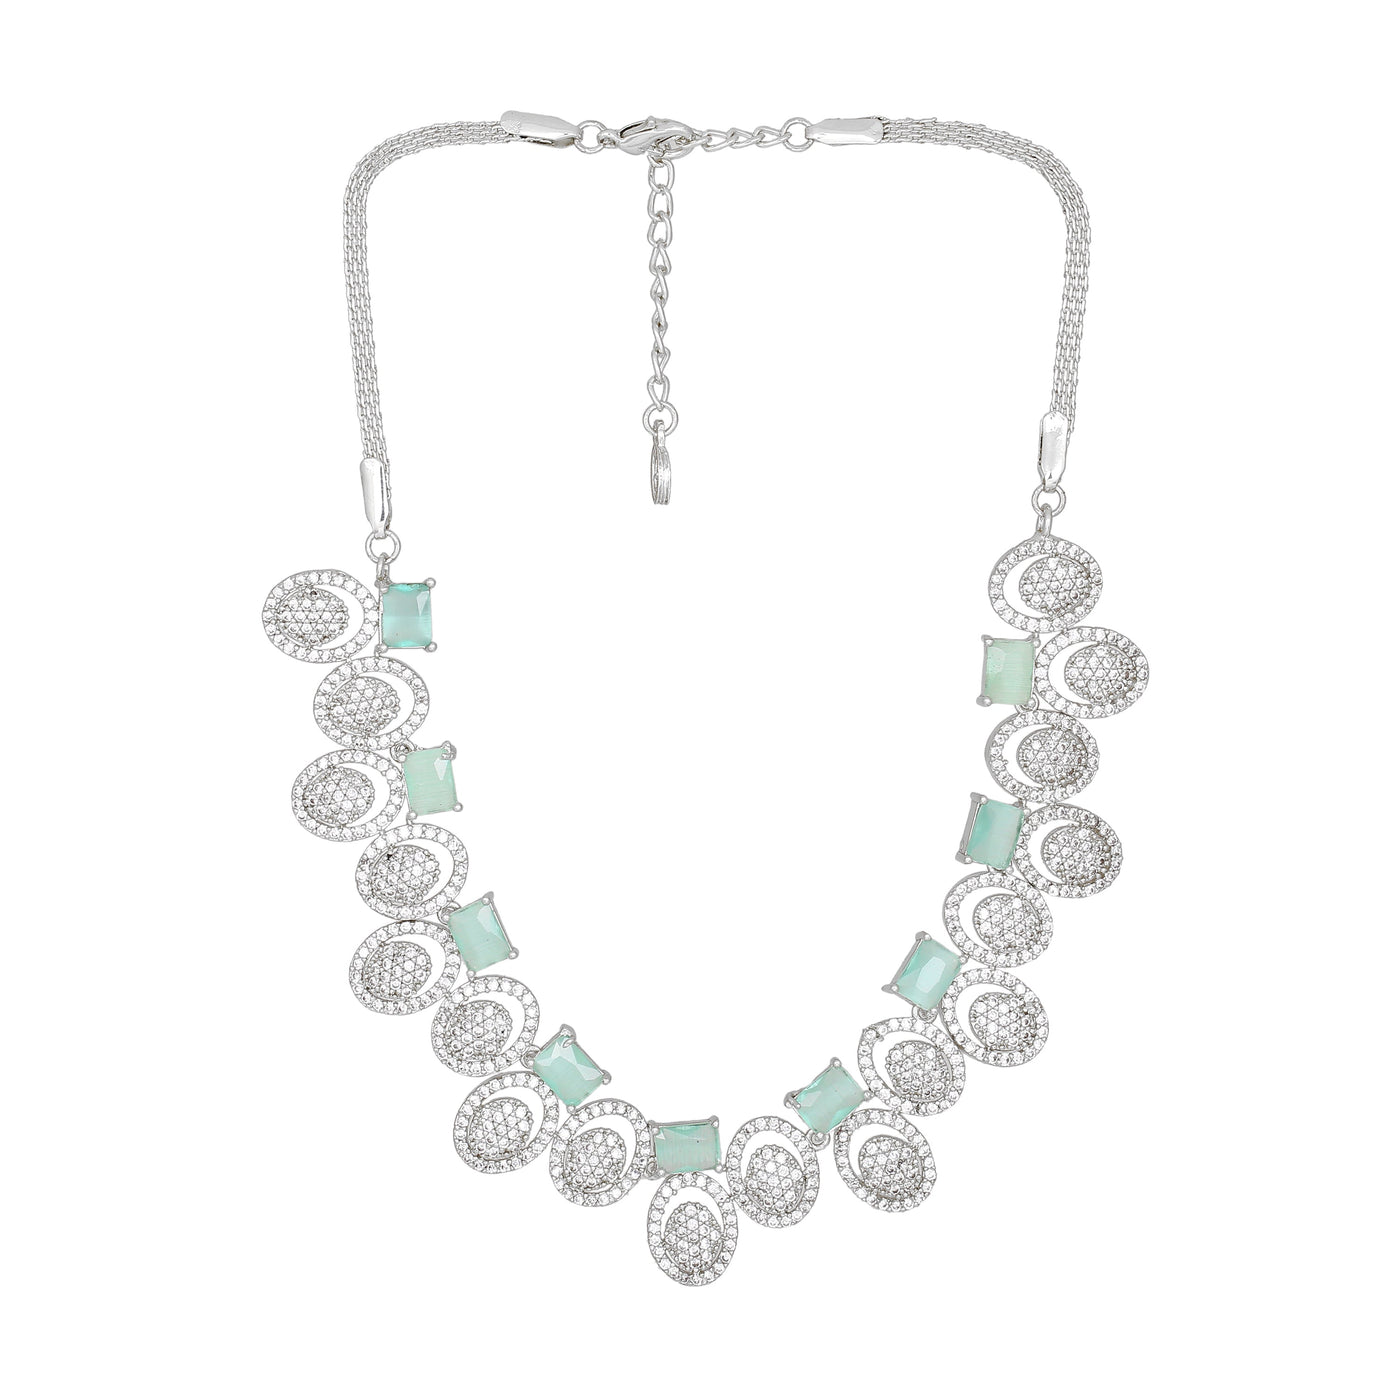 Estele Rhodium Plated CZ Circular Designer Necklace Set with Mint Green Crystals for Women